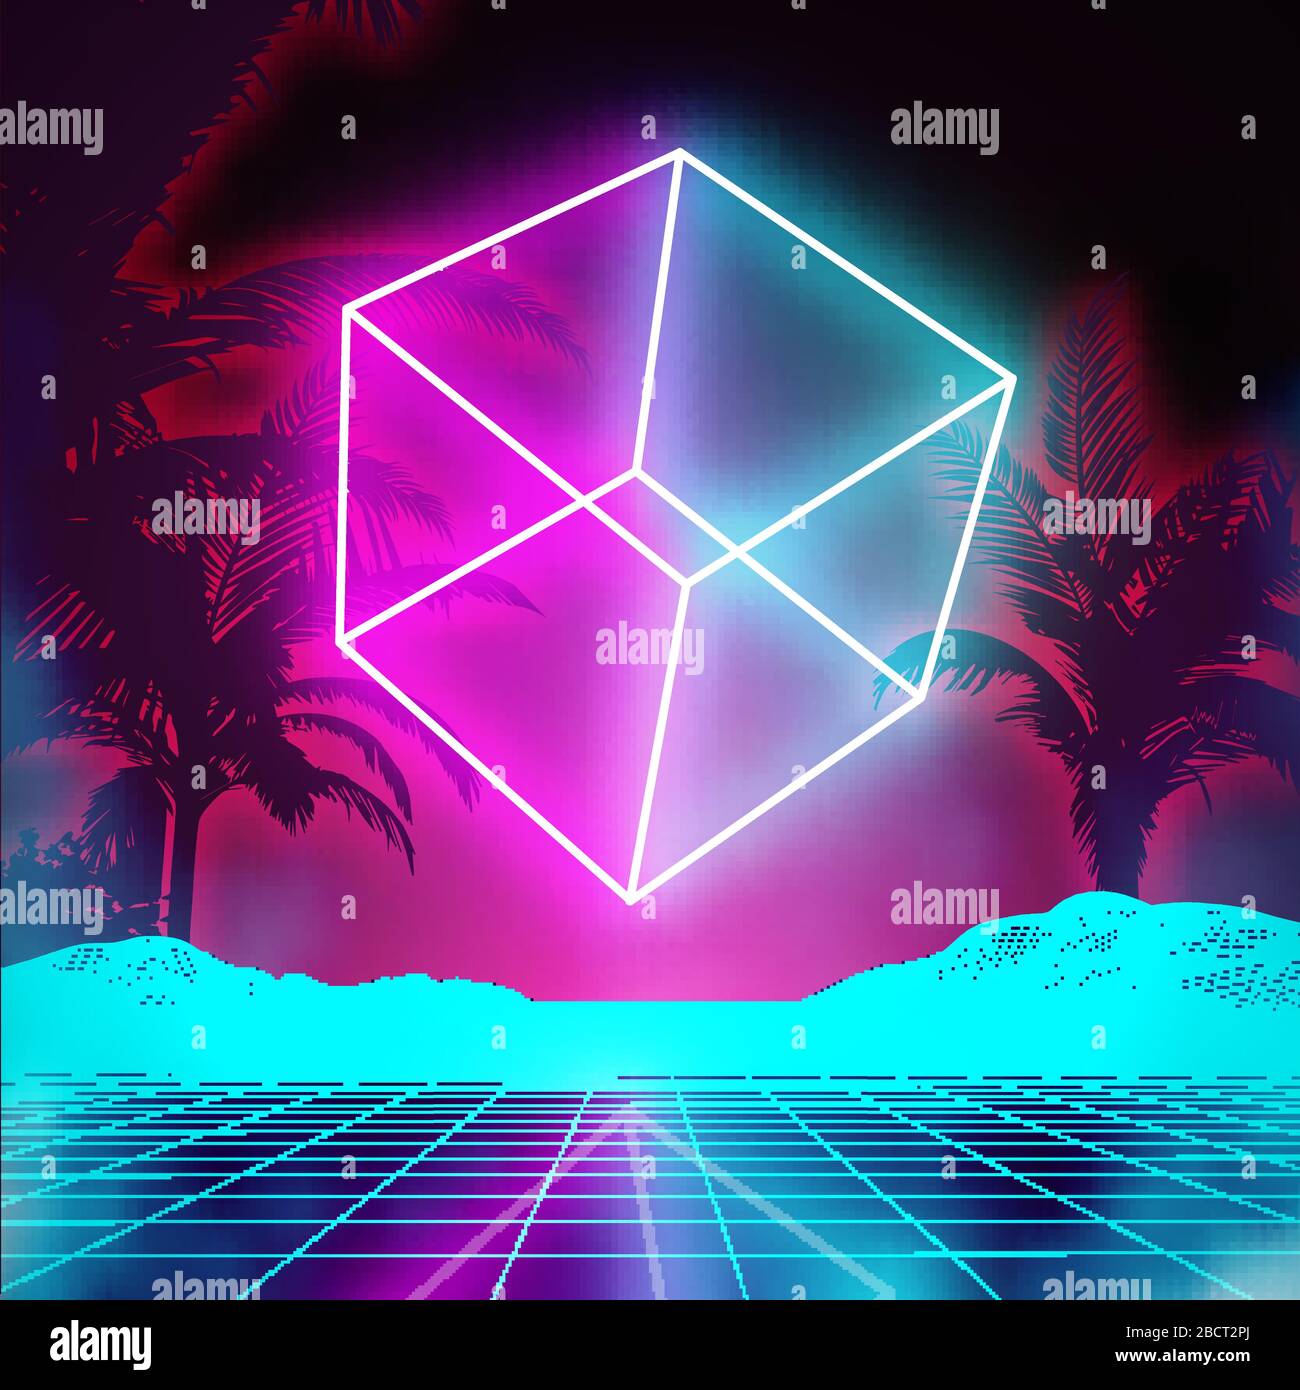 Retro futuristic background for game. Music 3d dance galaxy poster. 80s background disco. Neon cube synthwave digital wireframe landscape with palms Stock Vector